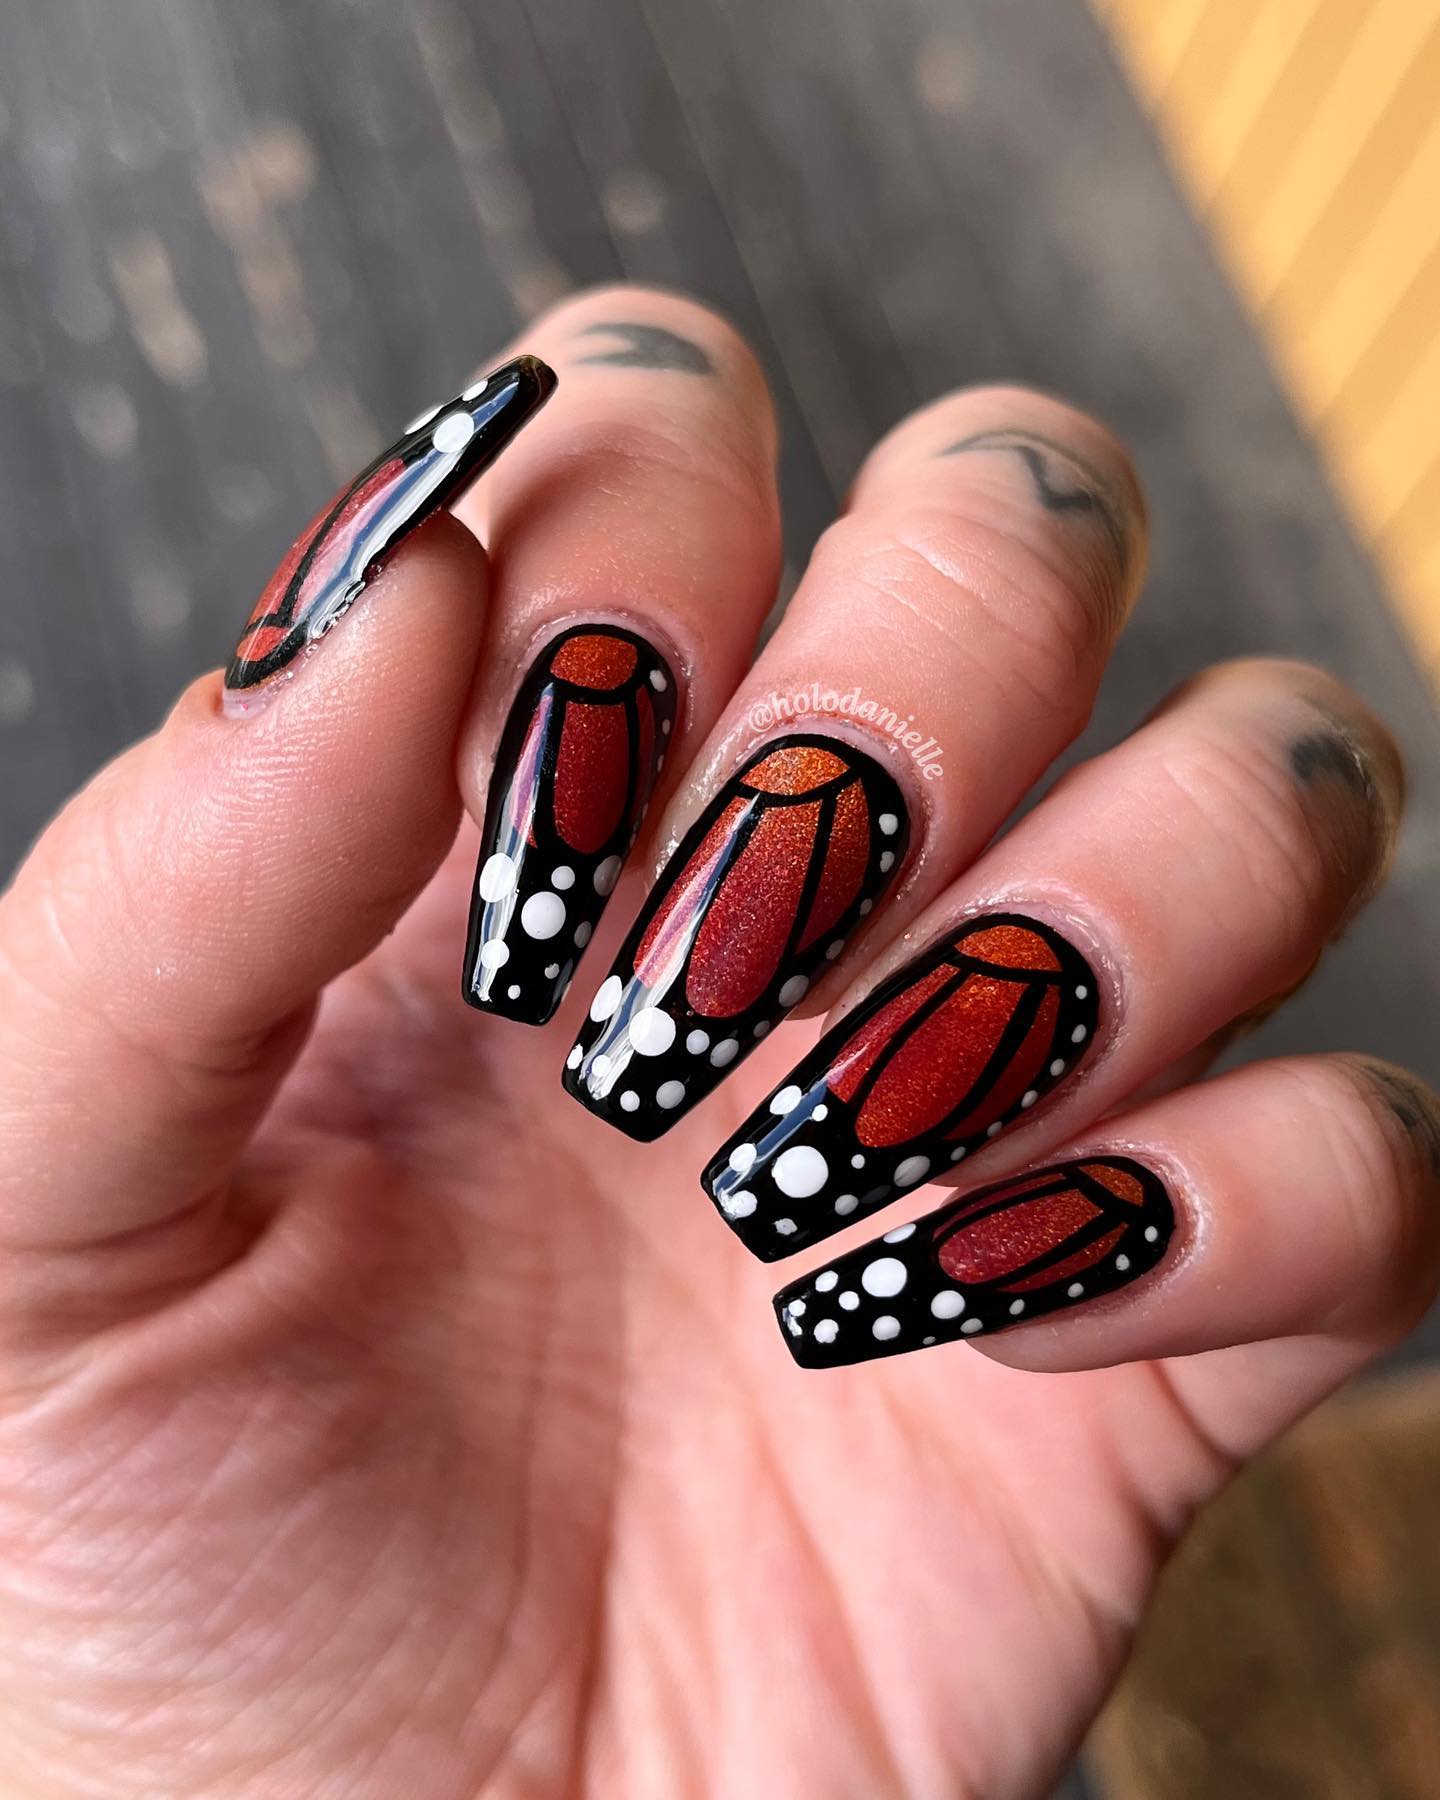 For those who want to have a big size of a butterfly, this nail design is for you. You can have the fullest butterfly feeling with this mani.